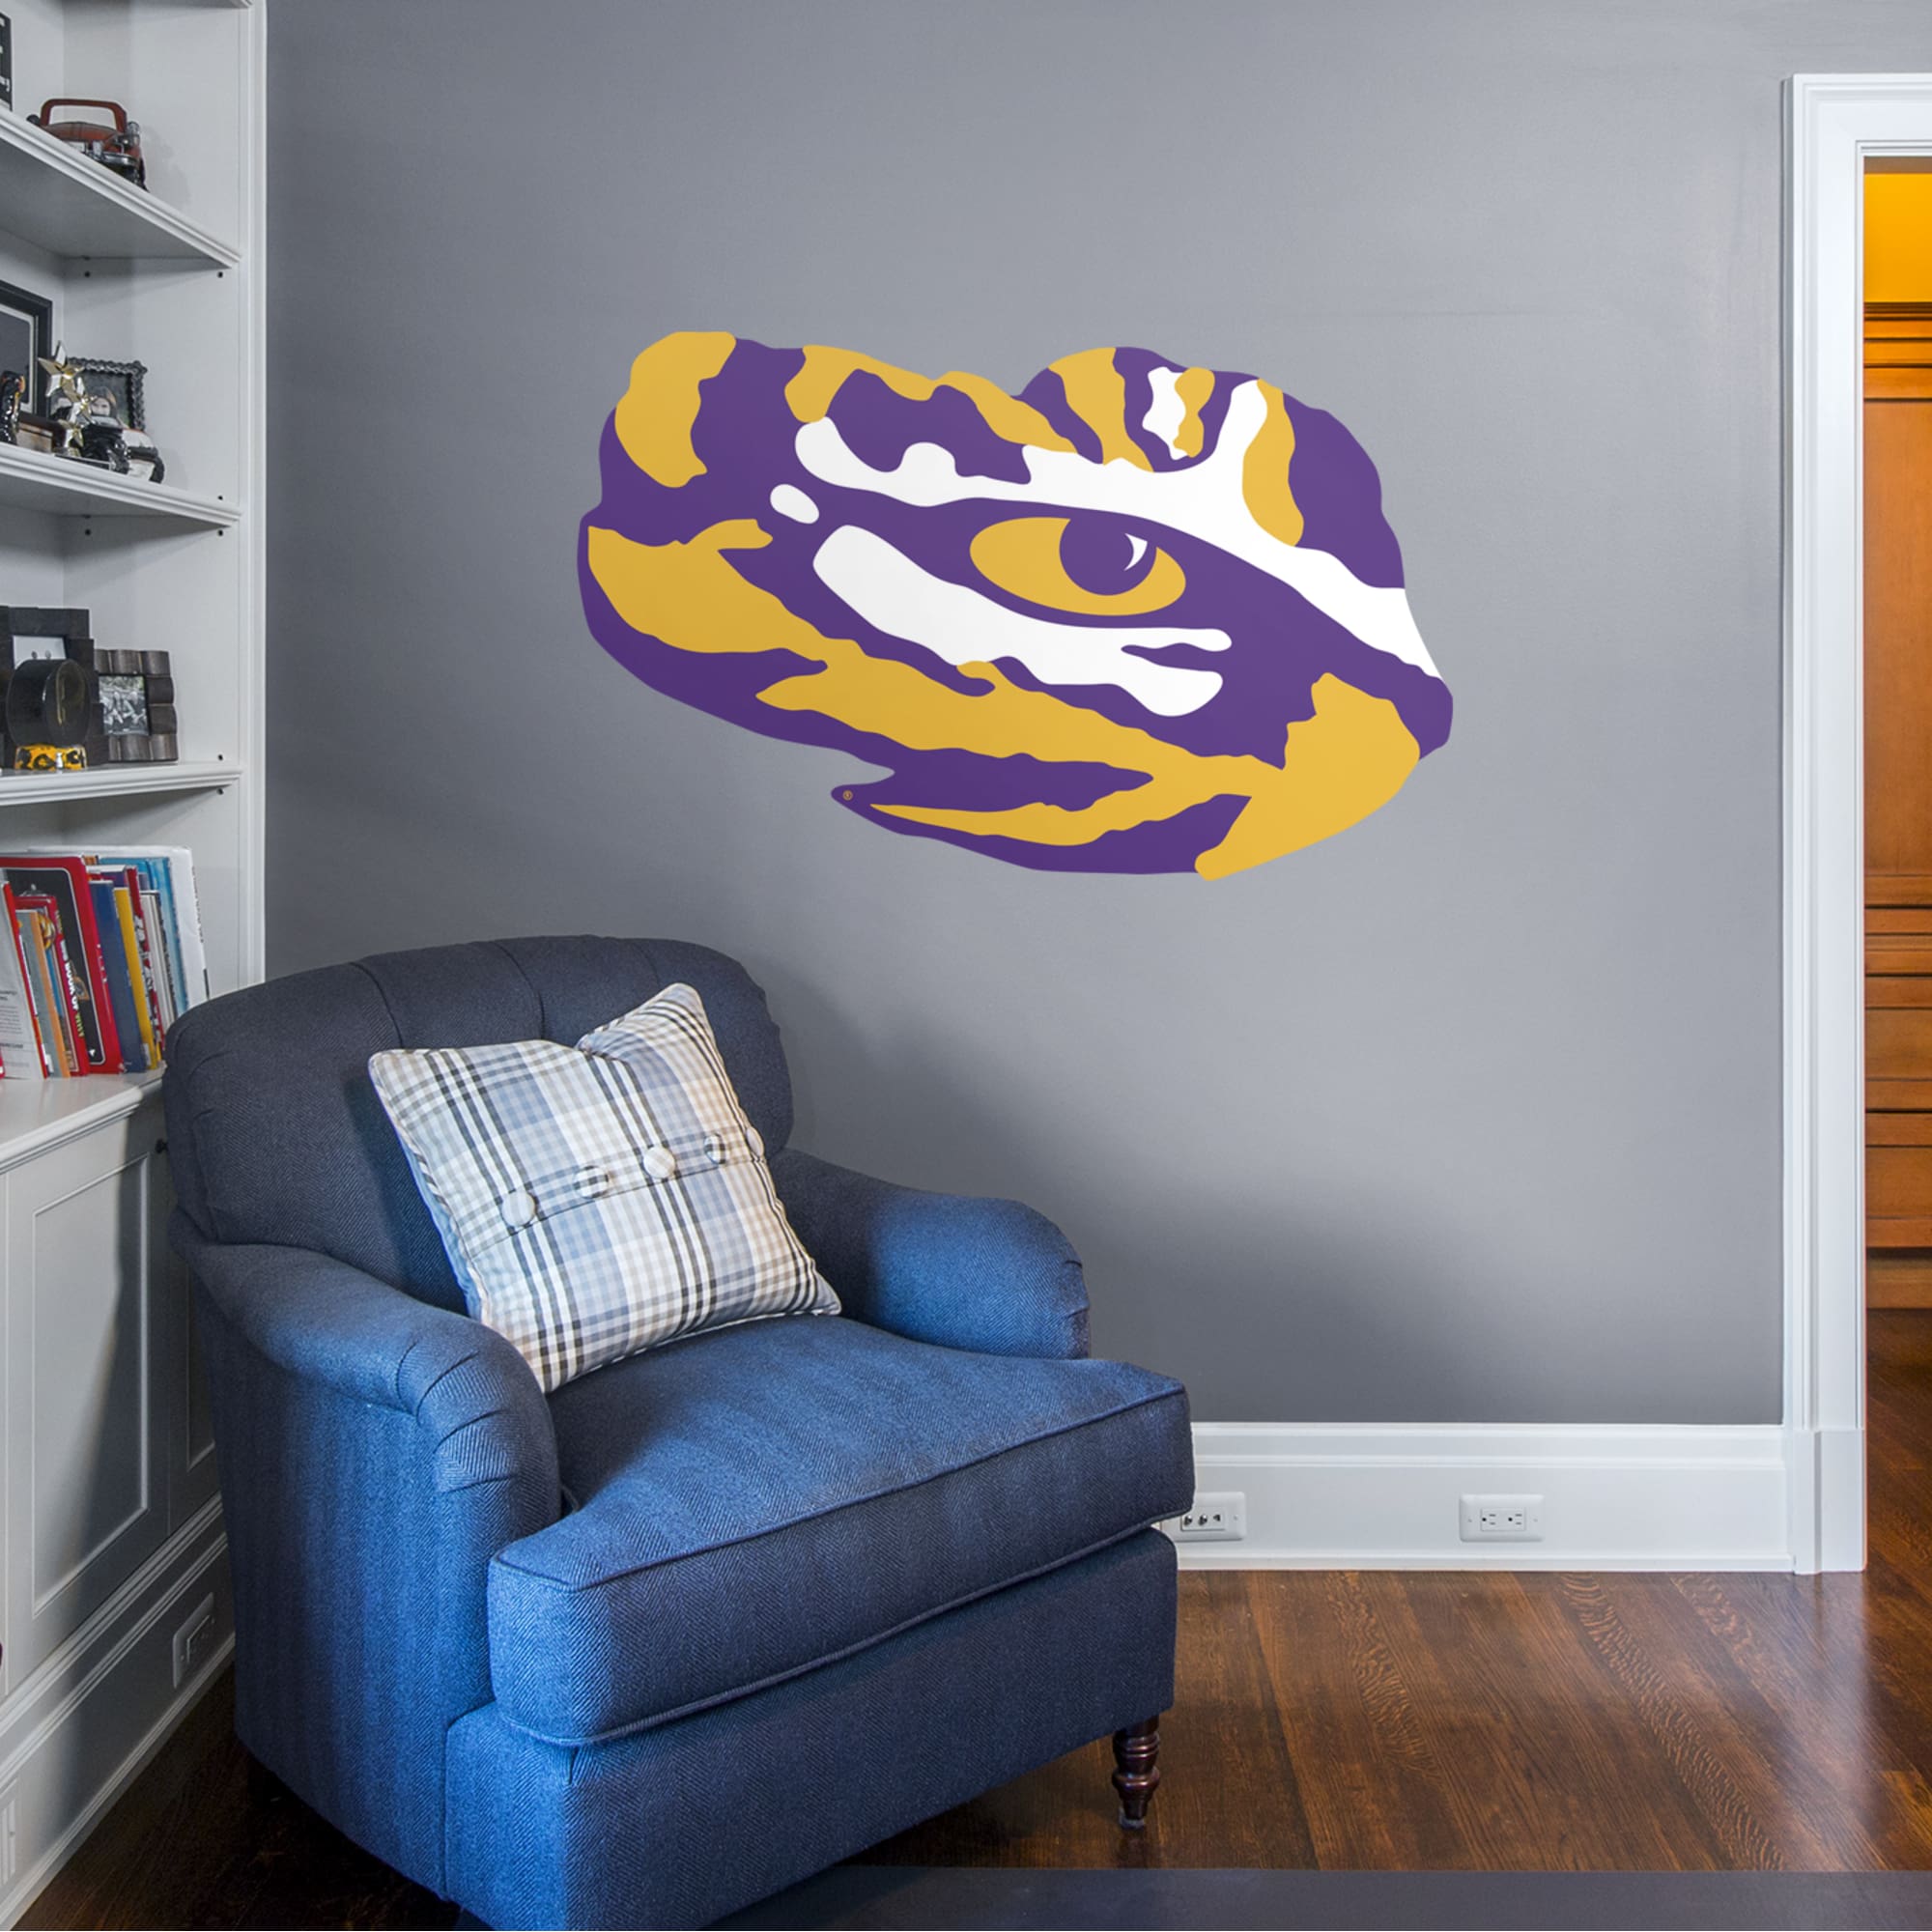 LSU Tigers: Eye of the Tiger Logo - Officially Licensed Removable Wall Decal 51.0"W x 32.0"H by Fathead | Vinyl